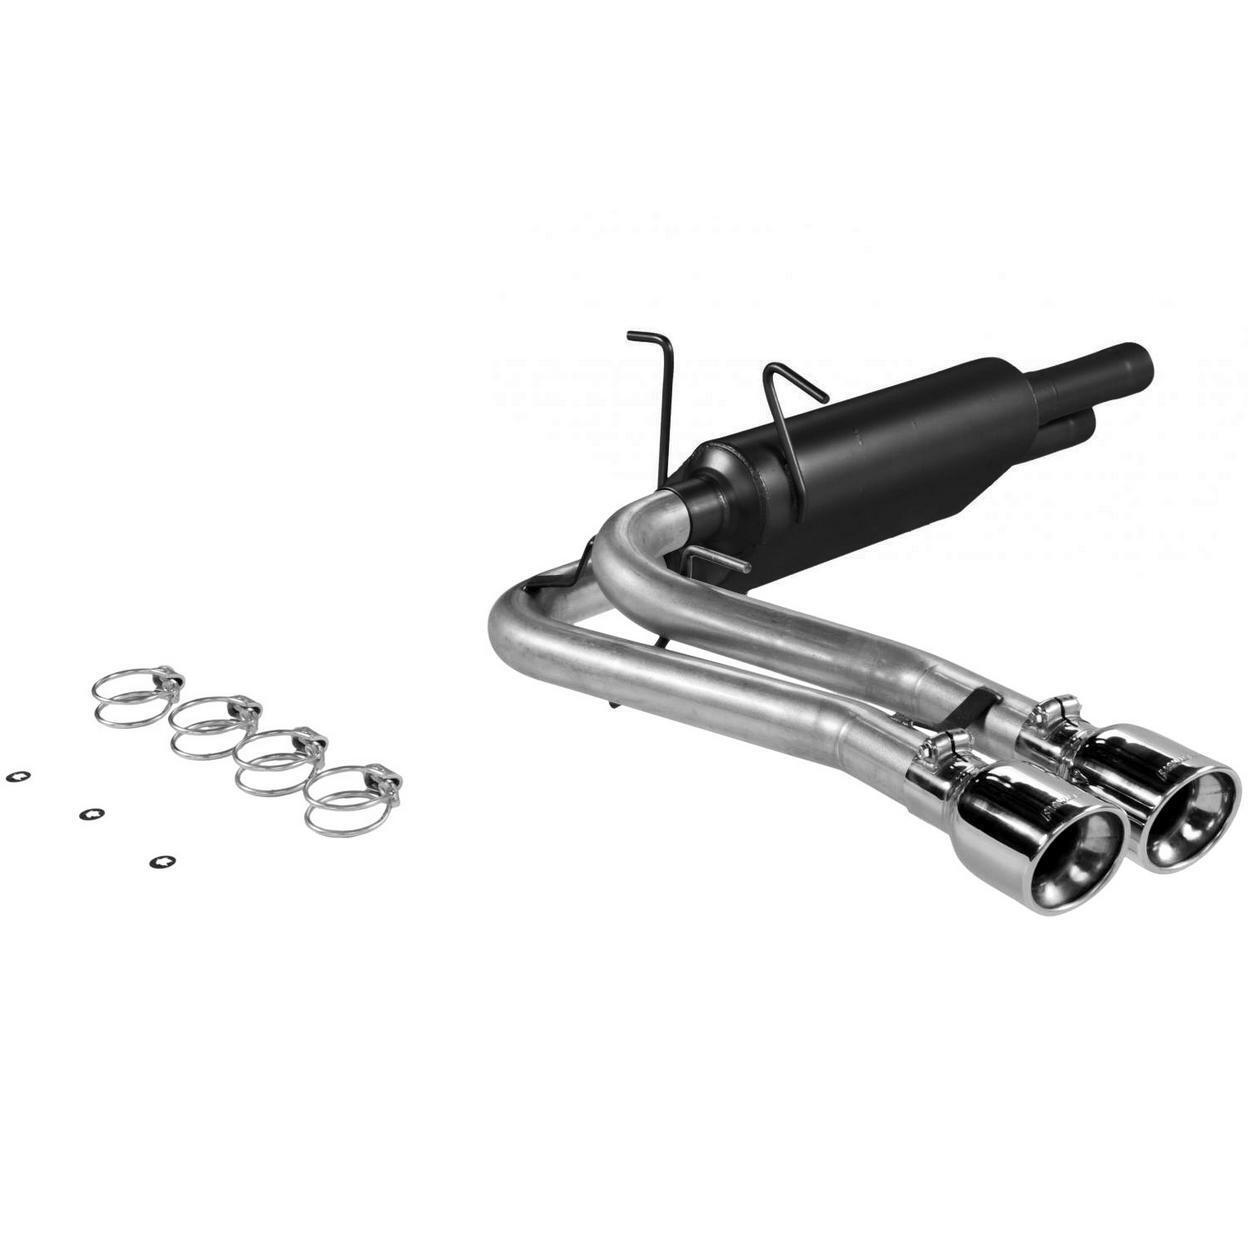 Exhaust System Kit for 2003 Ford F-150 Lightning Supercharged 5.4L V8 GAS SOHC